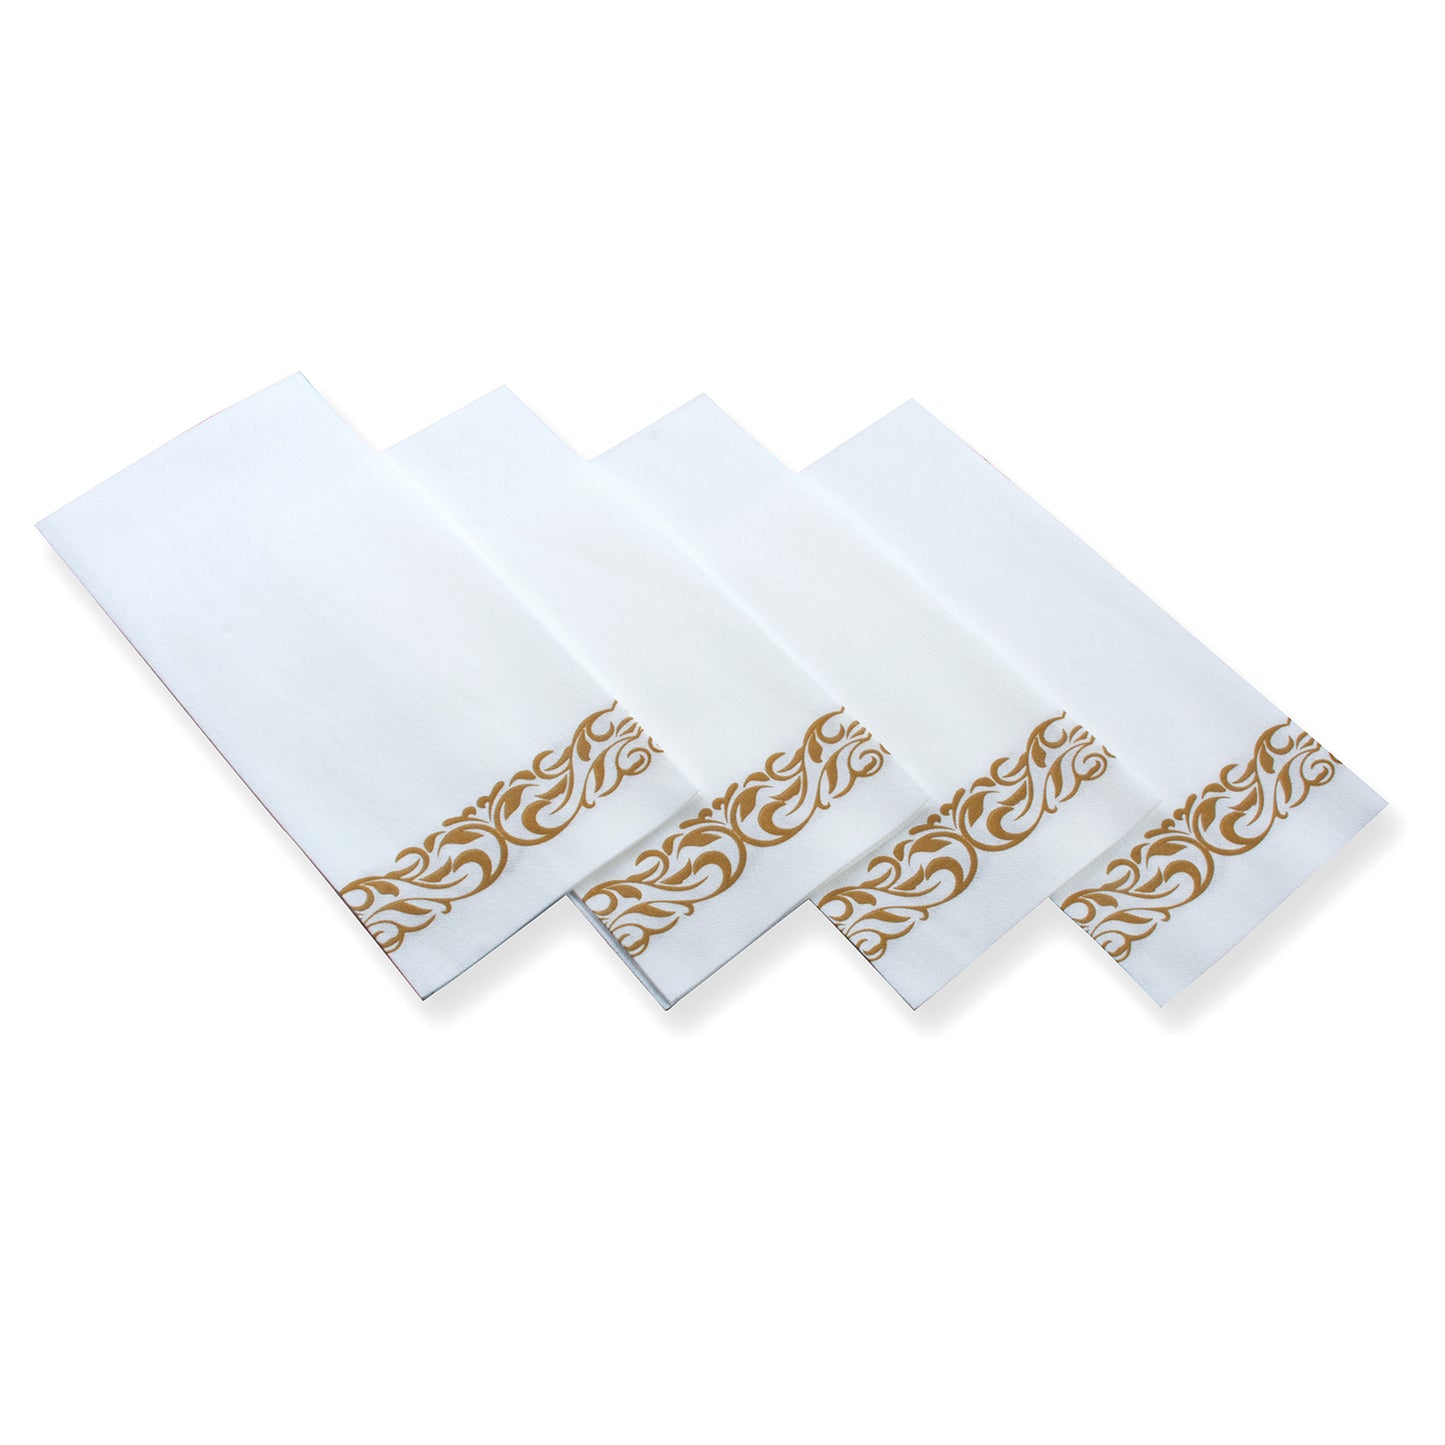 200 pc.  Disposable Linen-Feel Dinner Napkins / Guest towels  (White With Gold Trim Design)